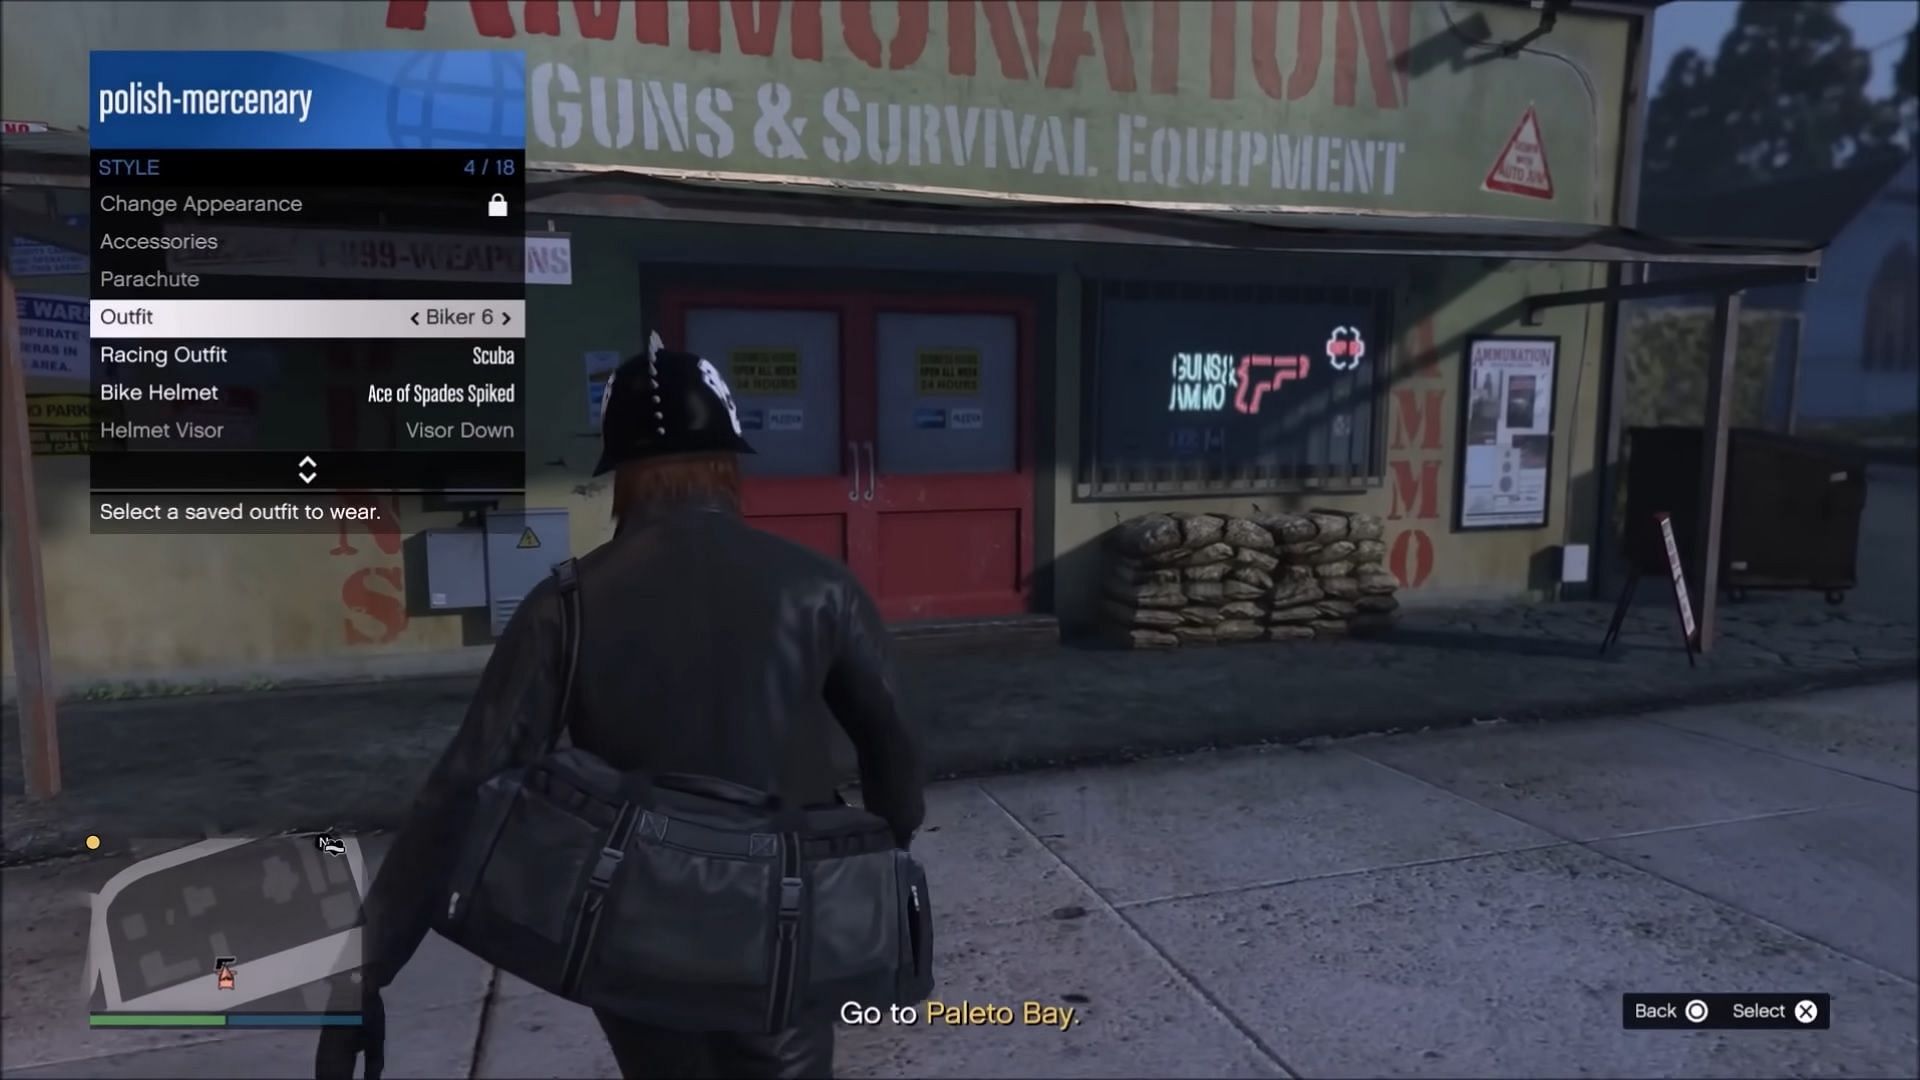 The accessories tab will be greyed out for some reason (Image via YouTube/TheProfessional)